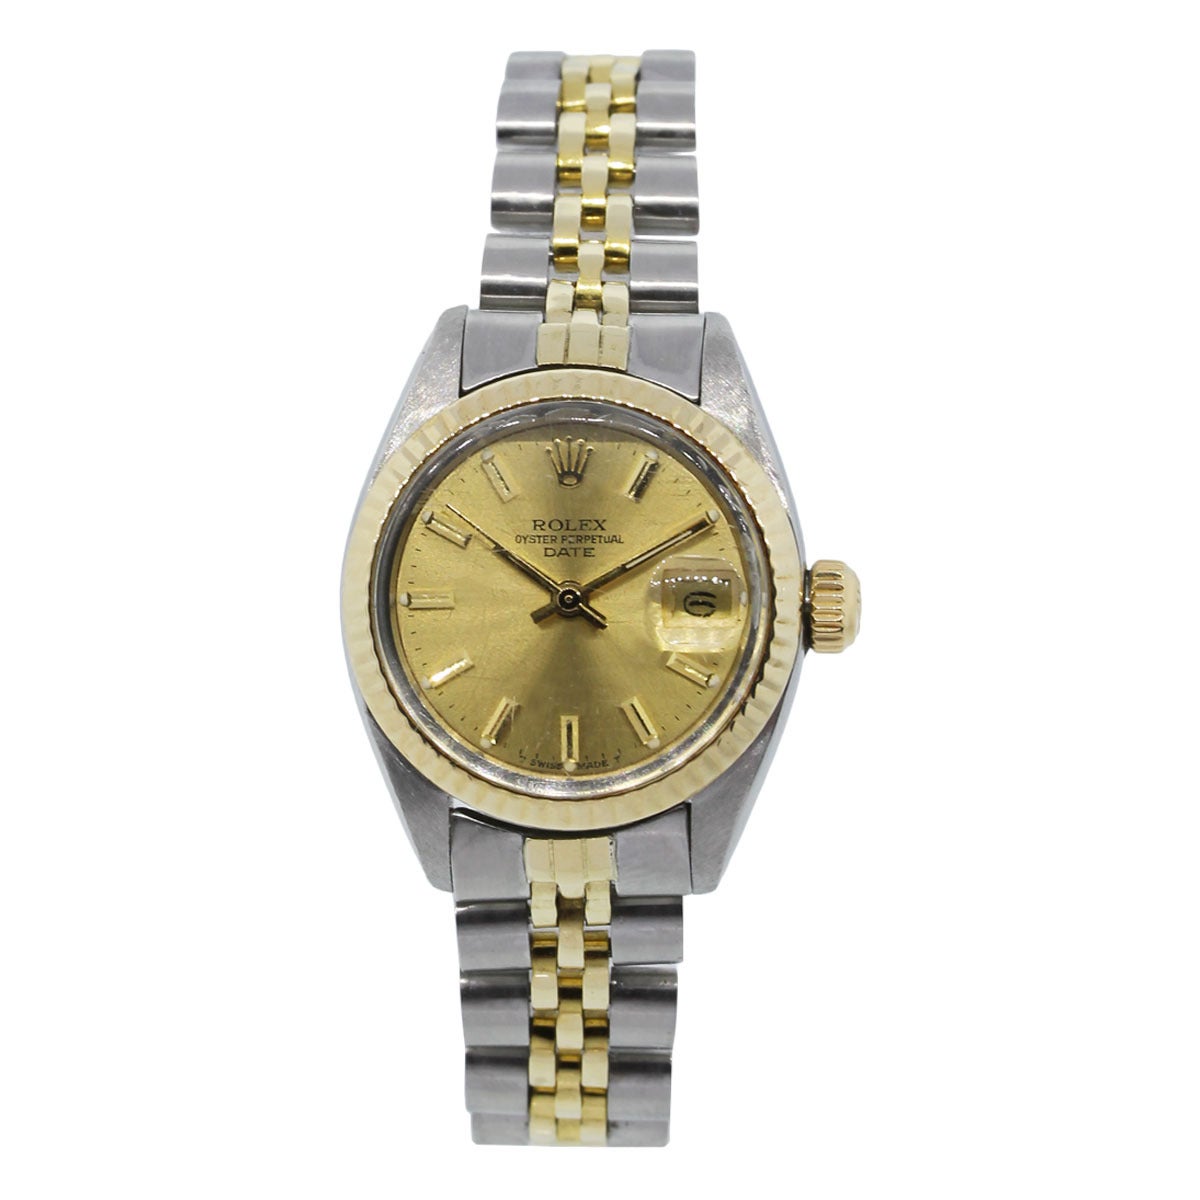 Brand: Rolex
Reference: 6917
Case Material: Stainless Steel
Movement: Automatic
Case Measurement: 26mm
Dial: Gold dial with gold sticks
Crystal: Plastic crystal
Clasp: Fold Over Clasp
Size: Will Fit a 6.25